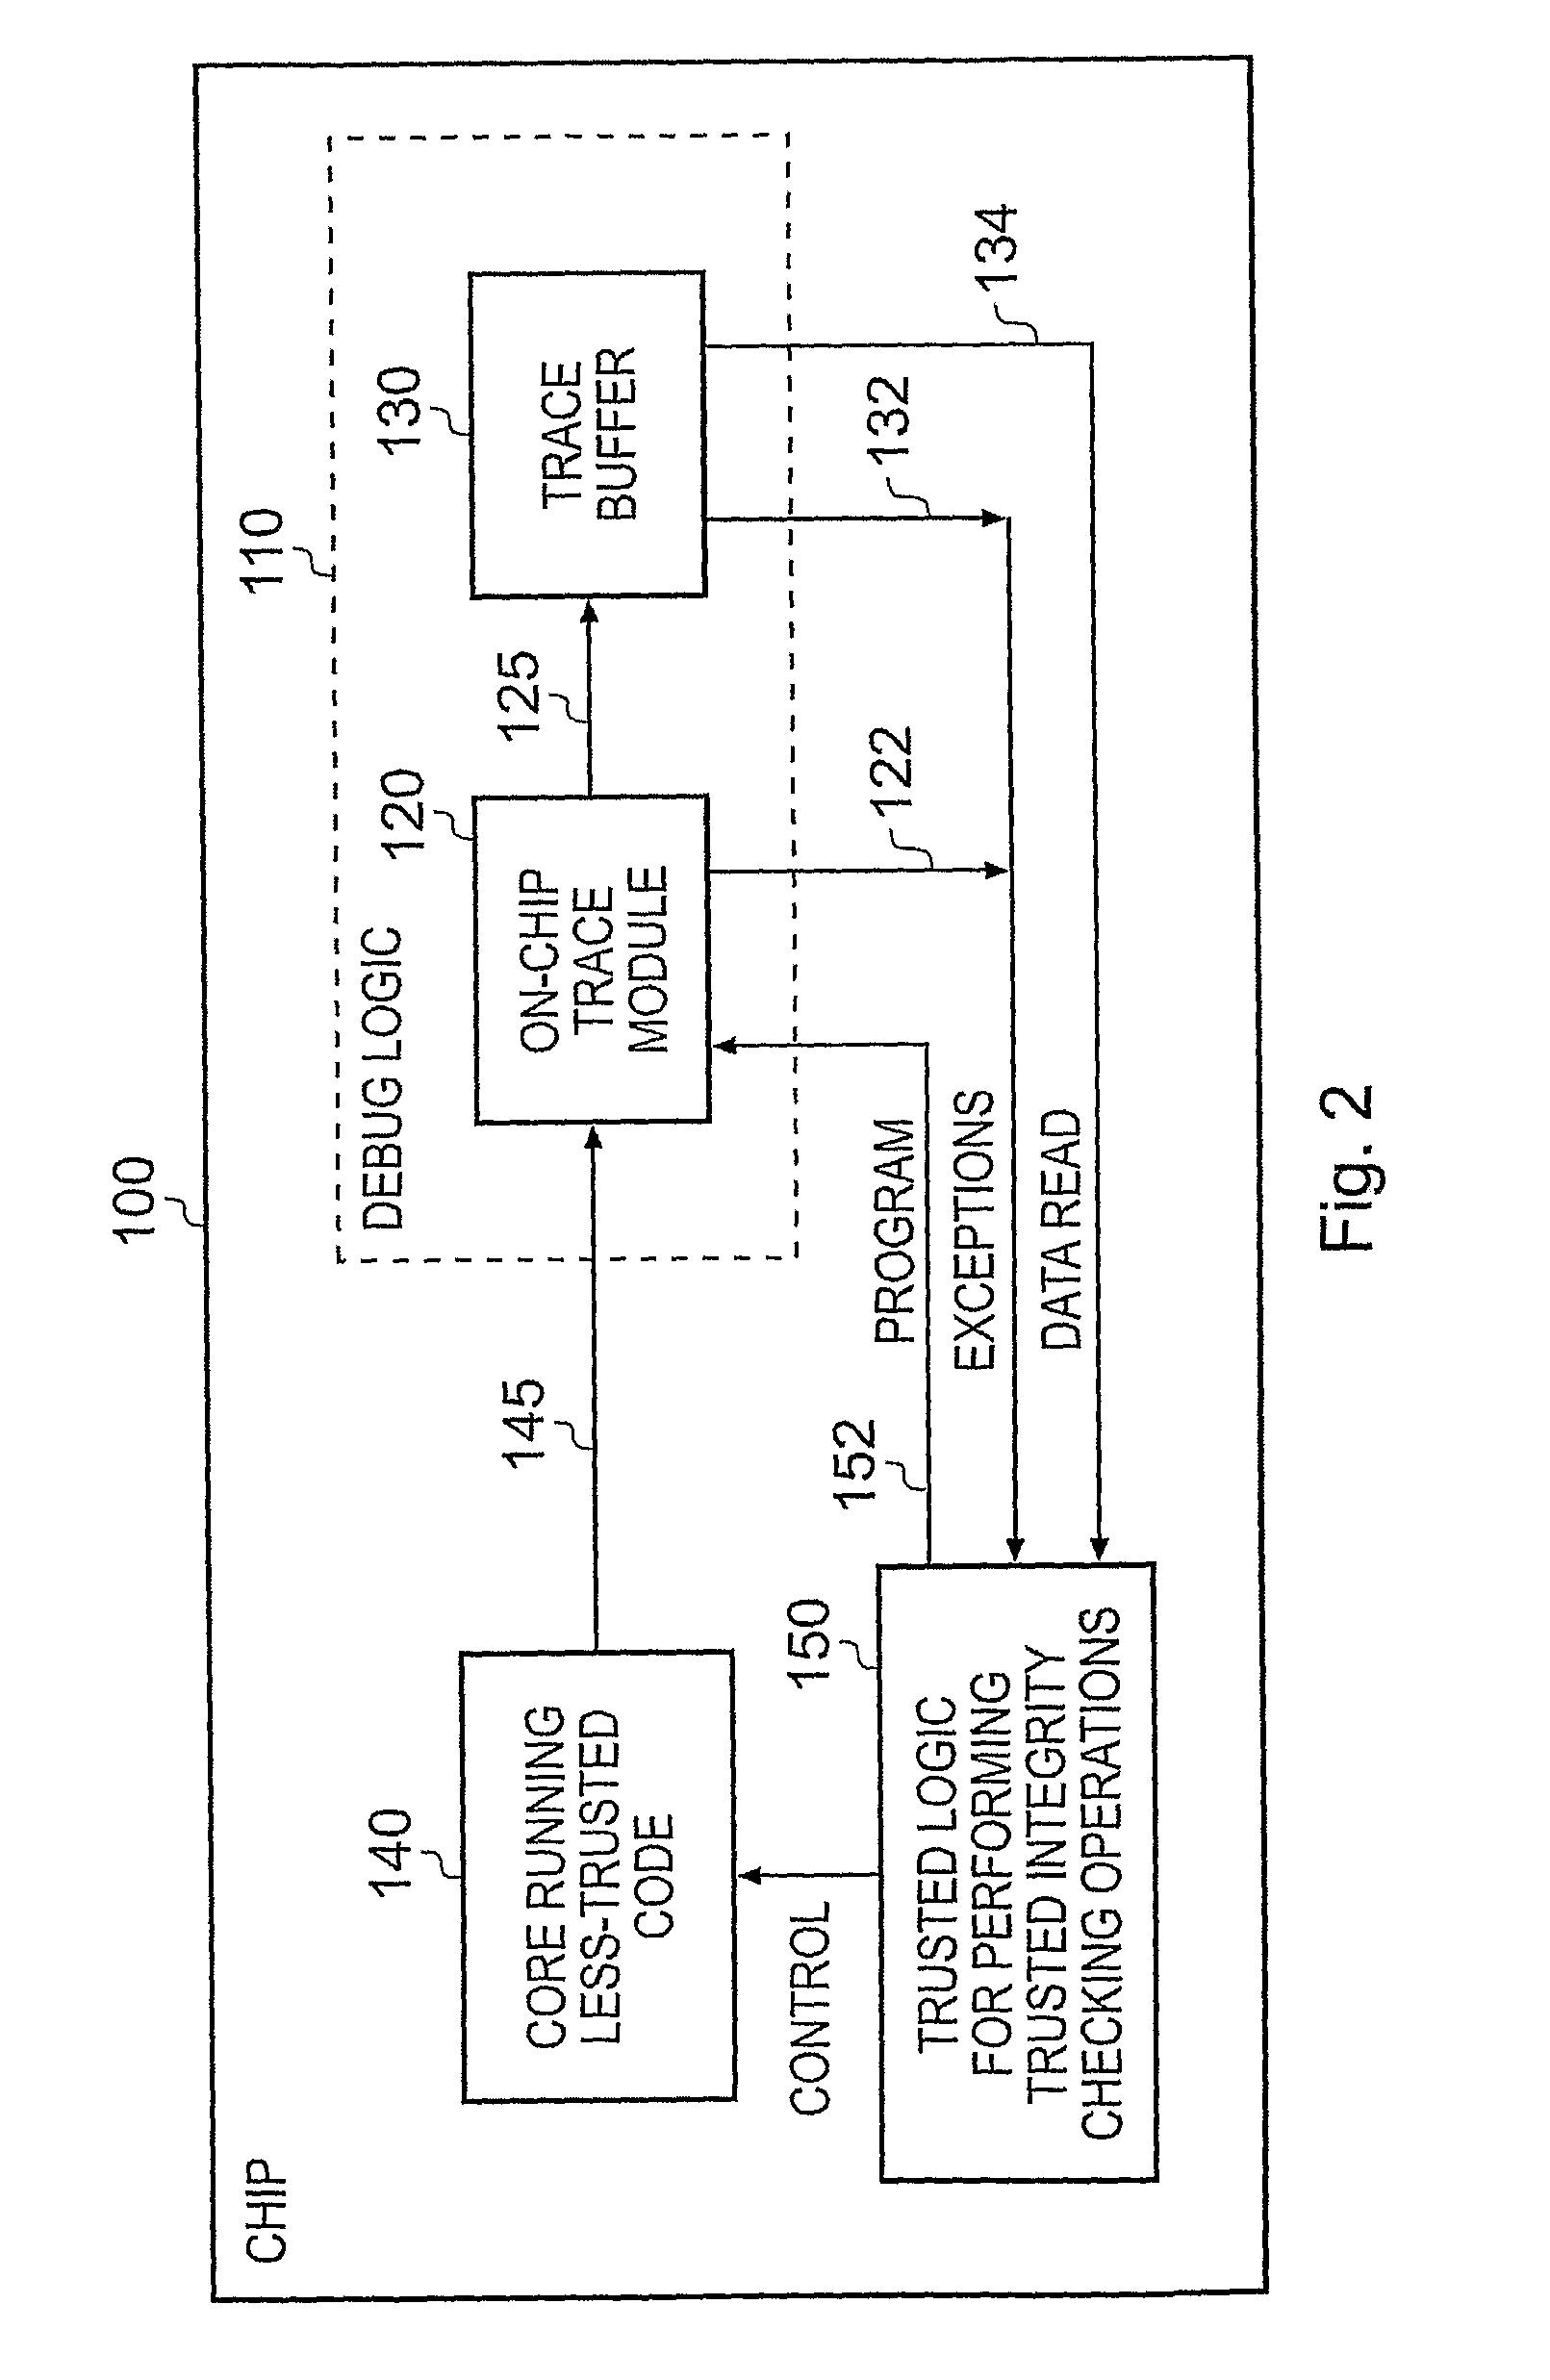 Apparatus and method for performing integrity checks on sofware